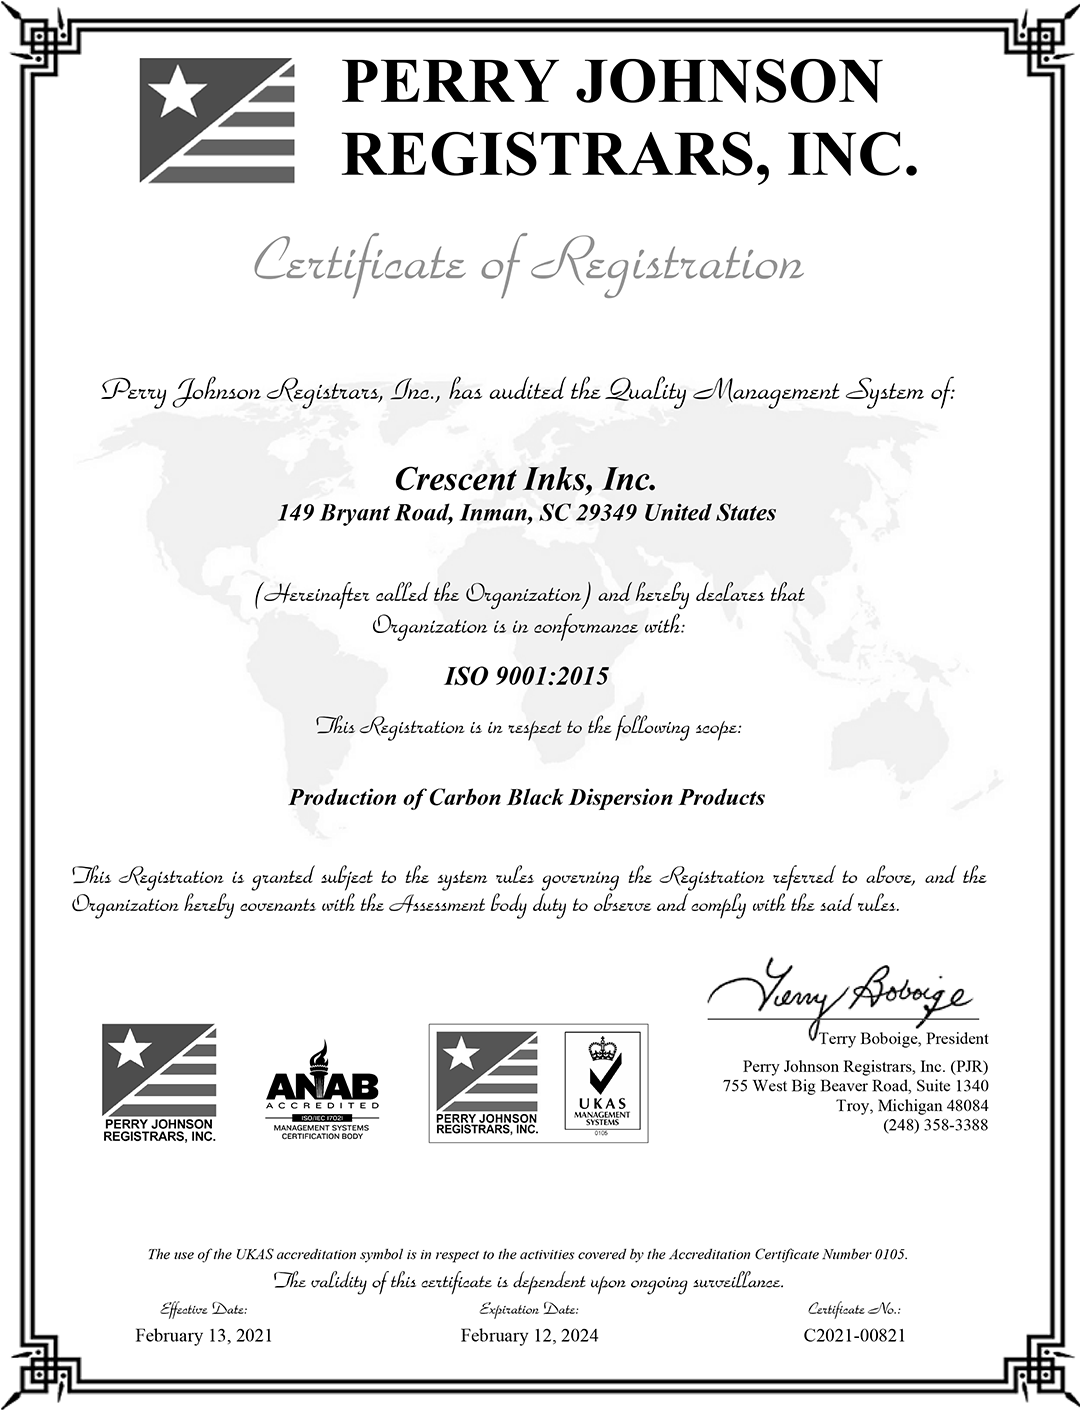 Crescent Inks Inc of Spartanburg SC - Inman South Carolina - ISO Quality Certification